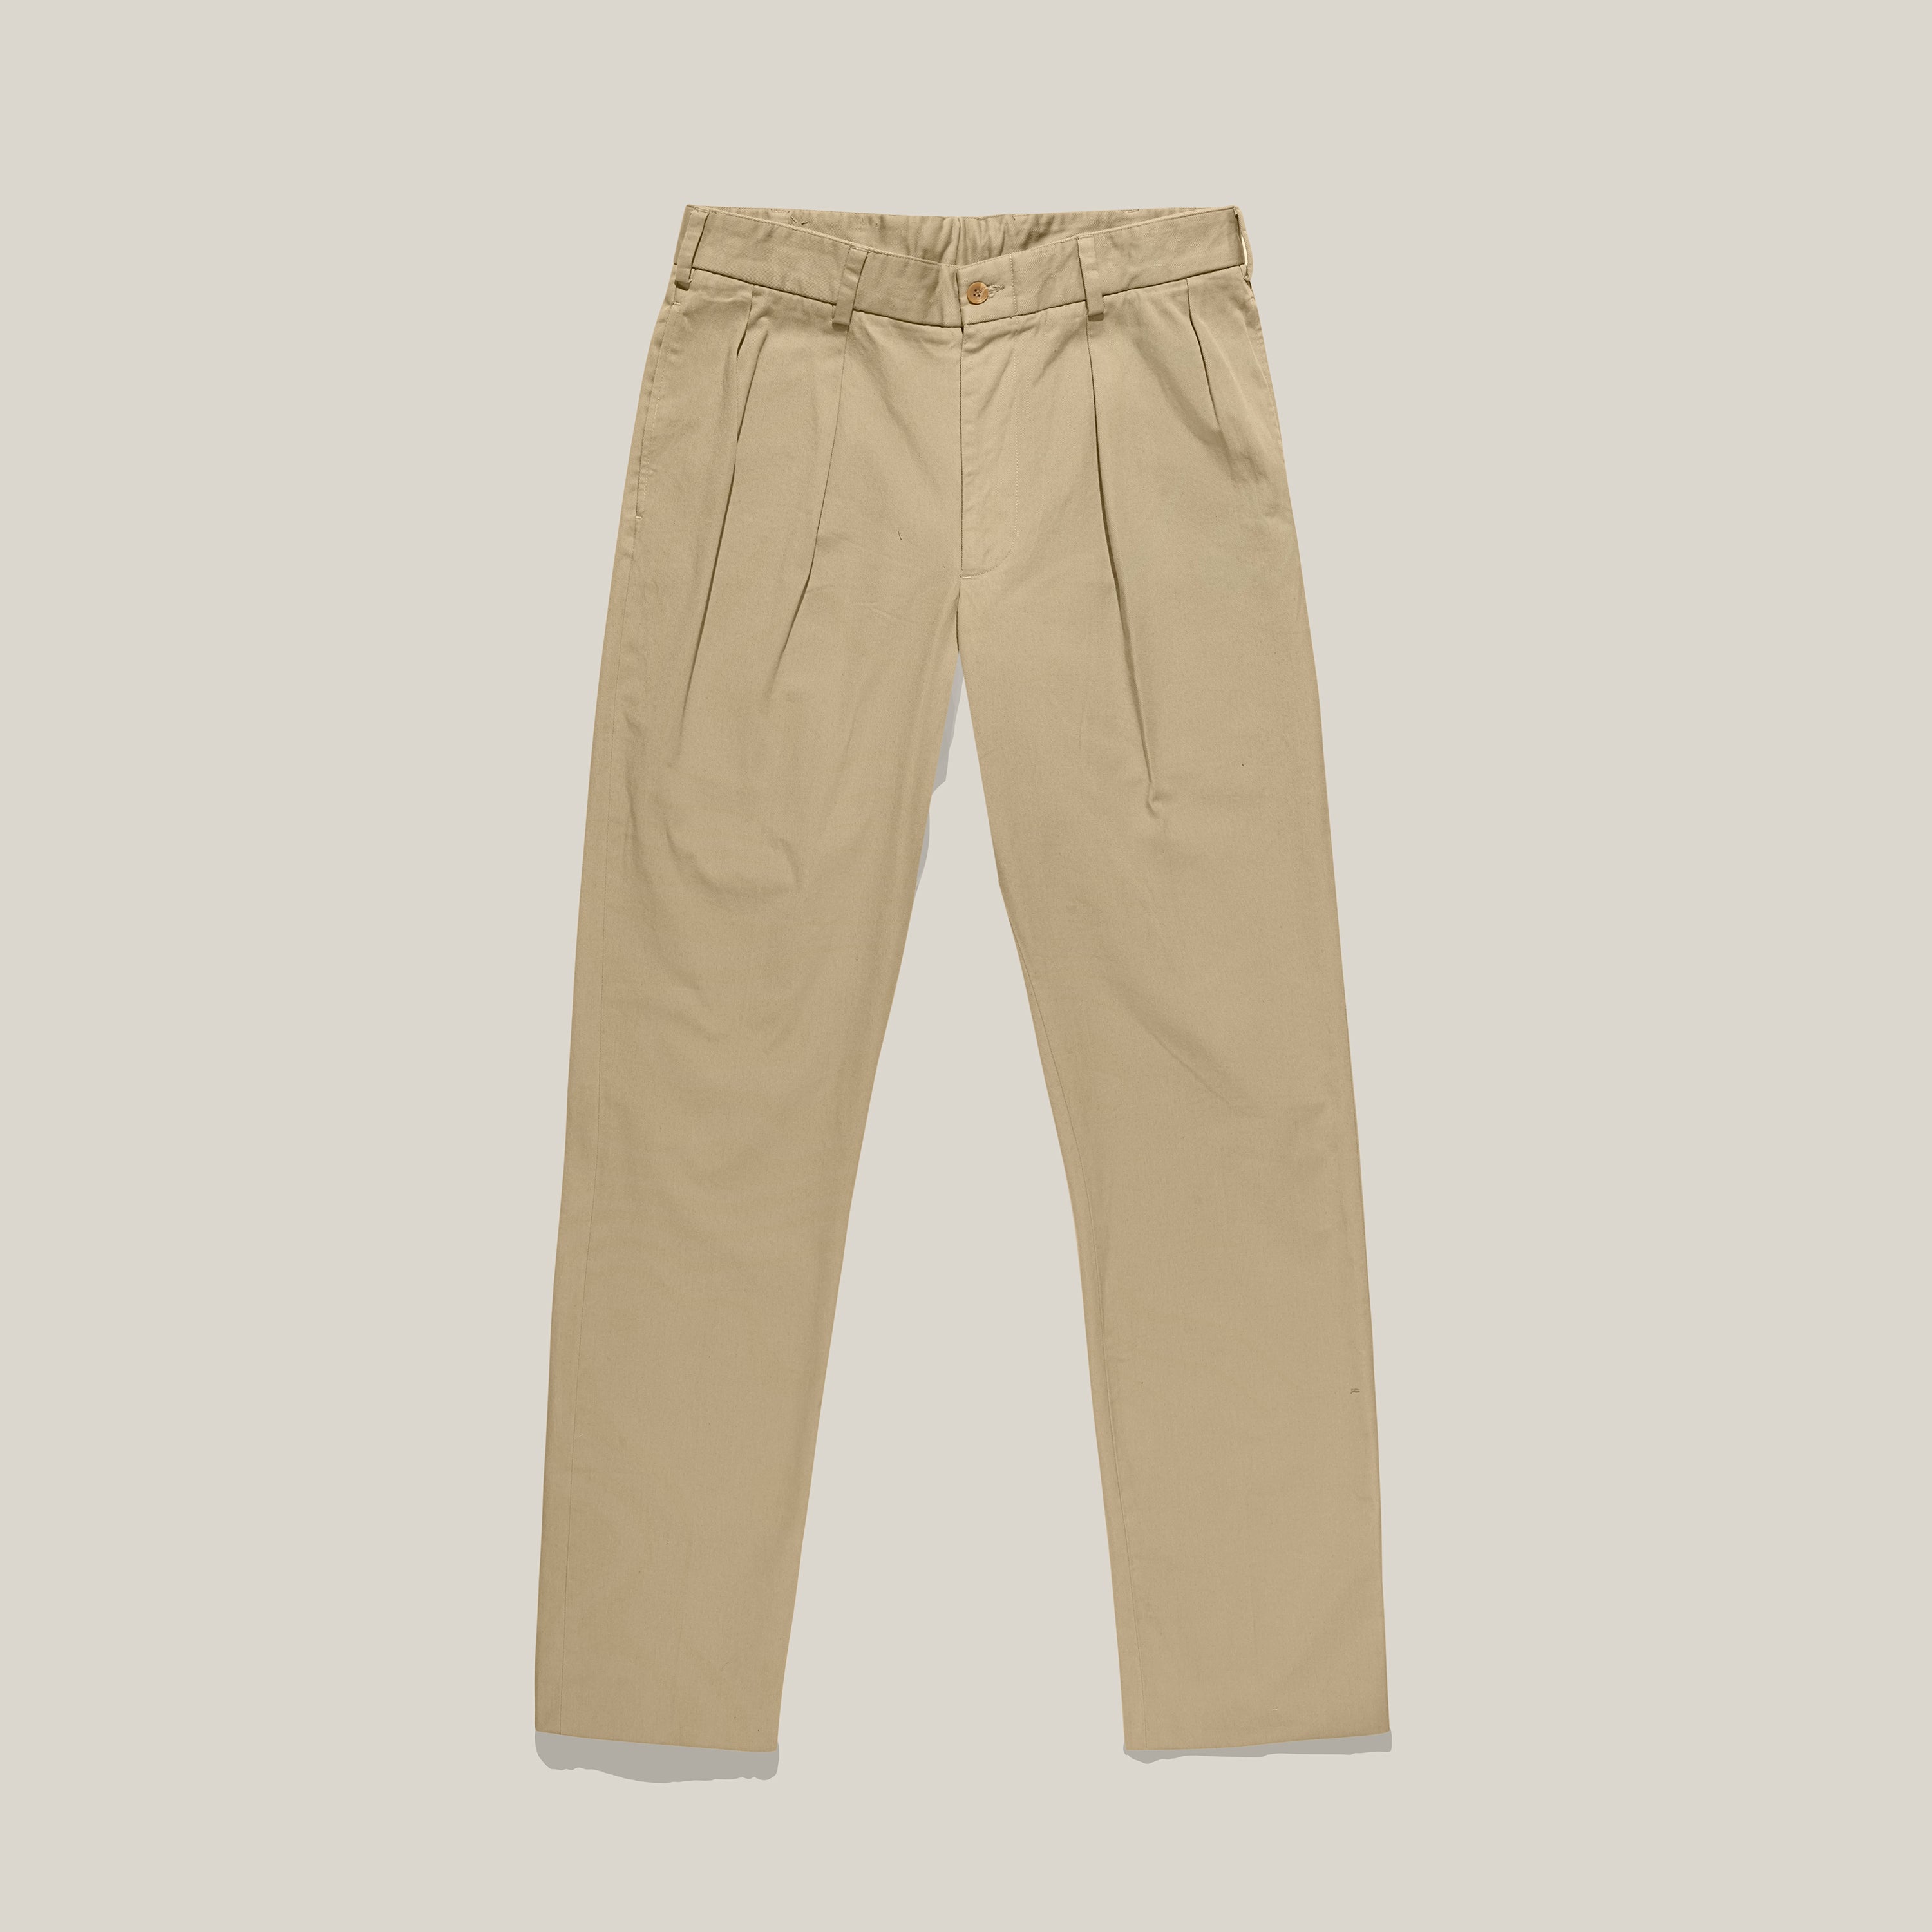 M1P - Relaxed Fit Pleated - Original Twill